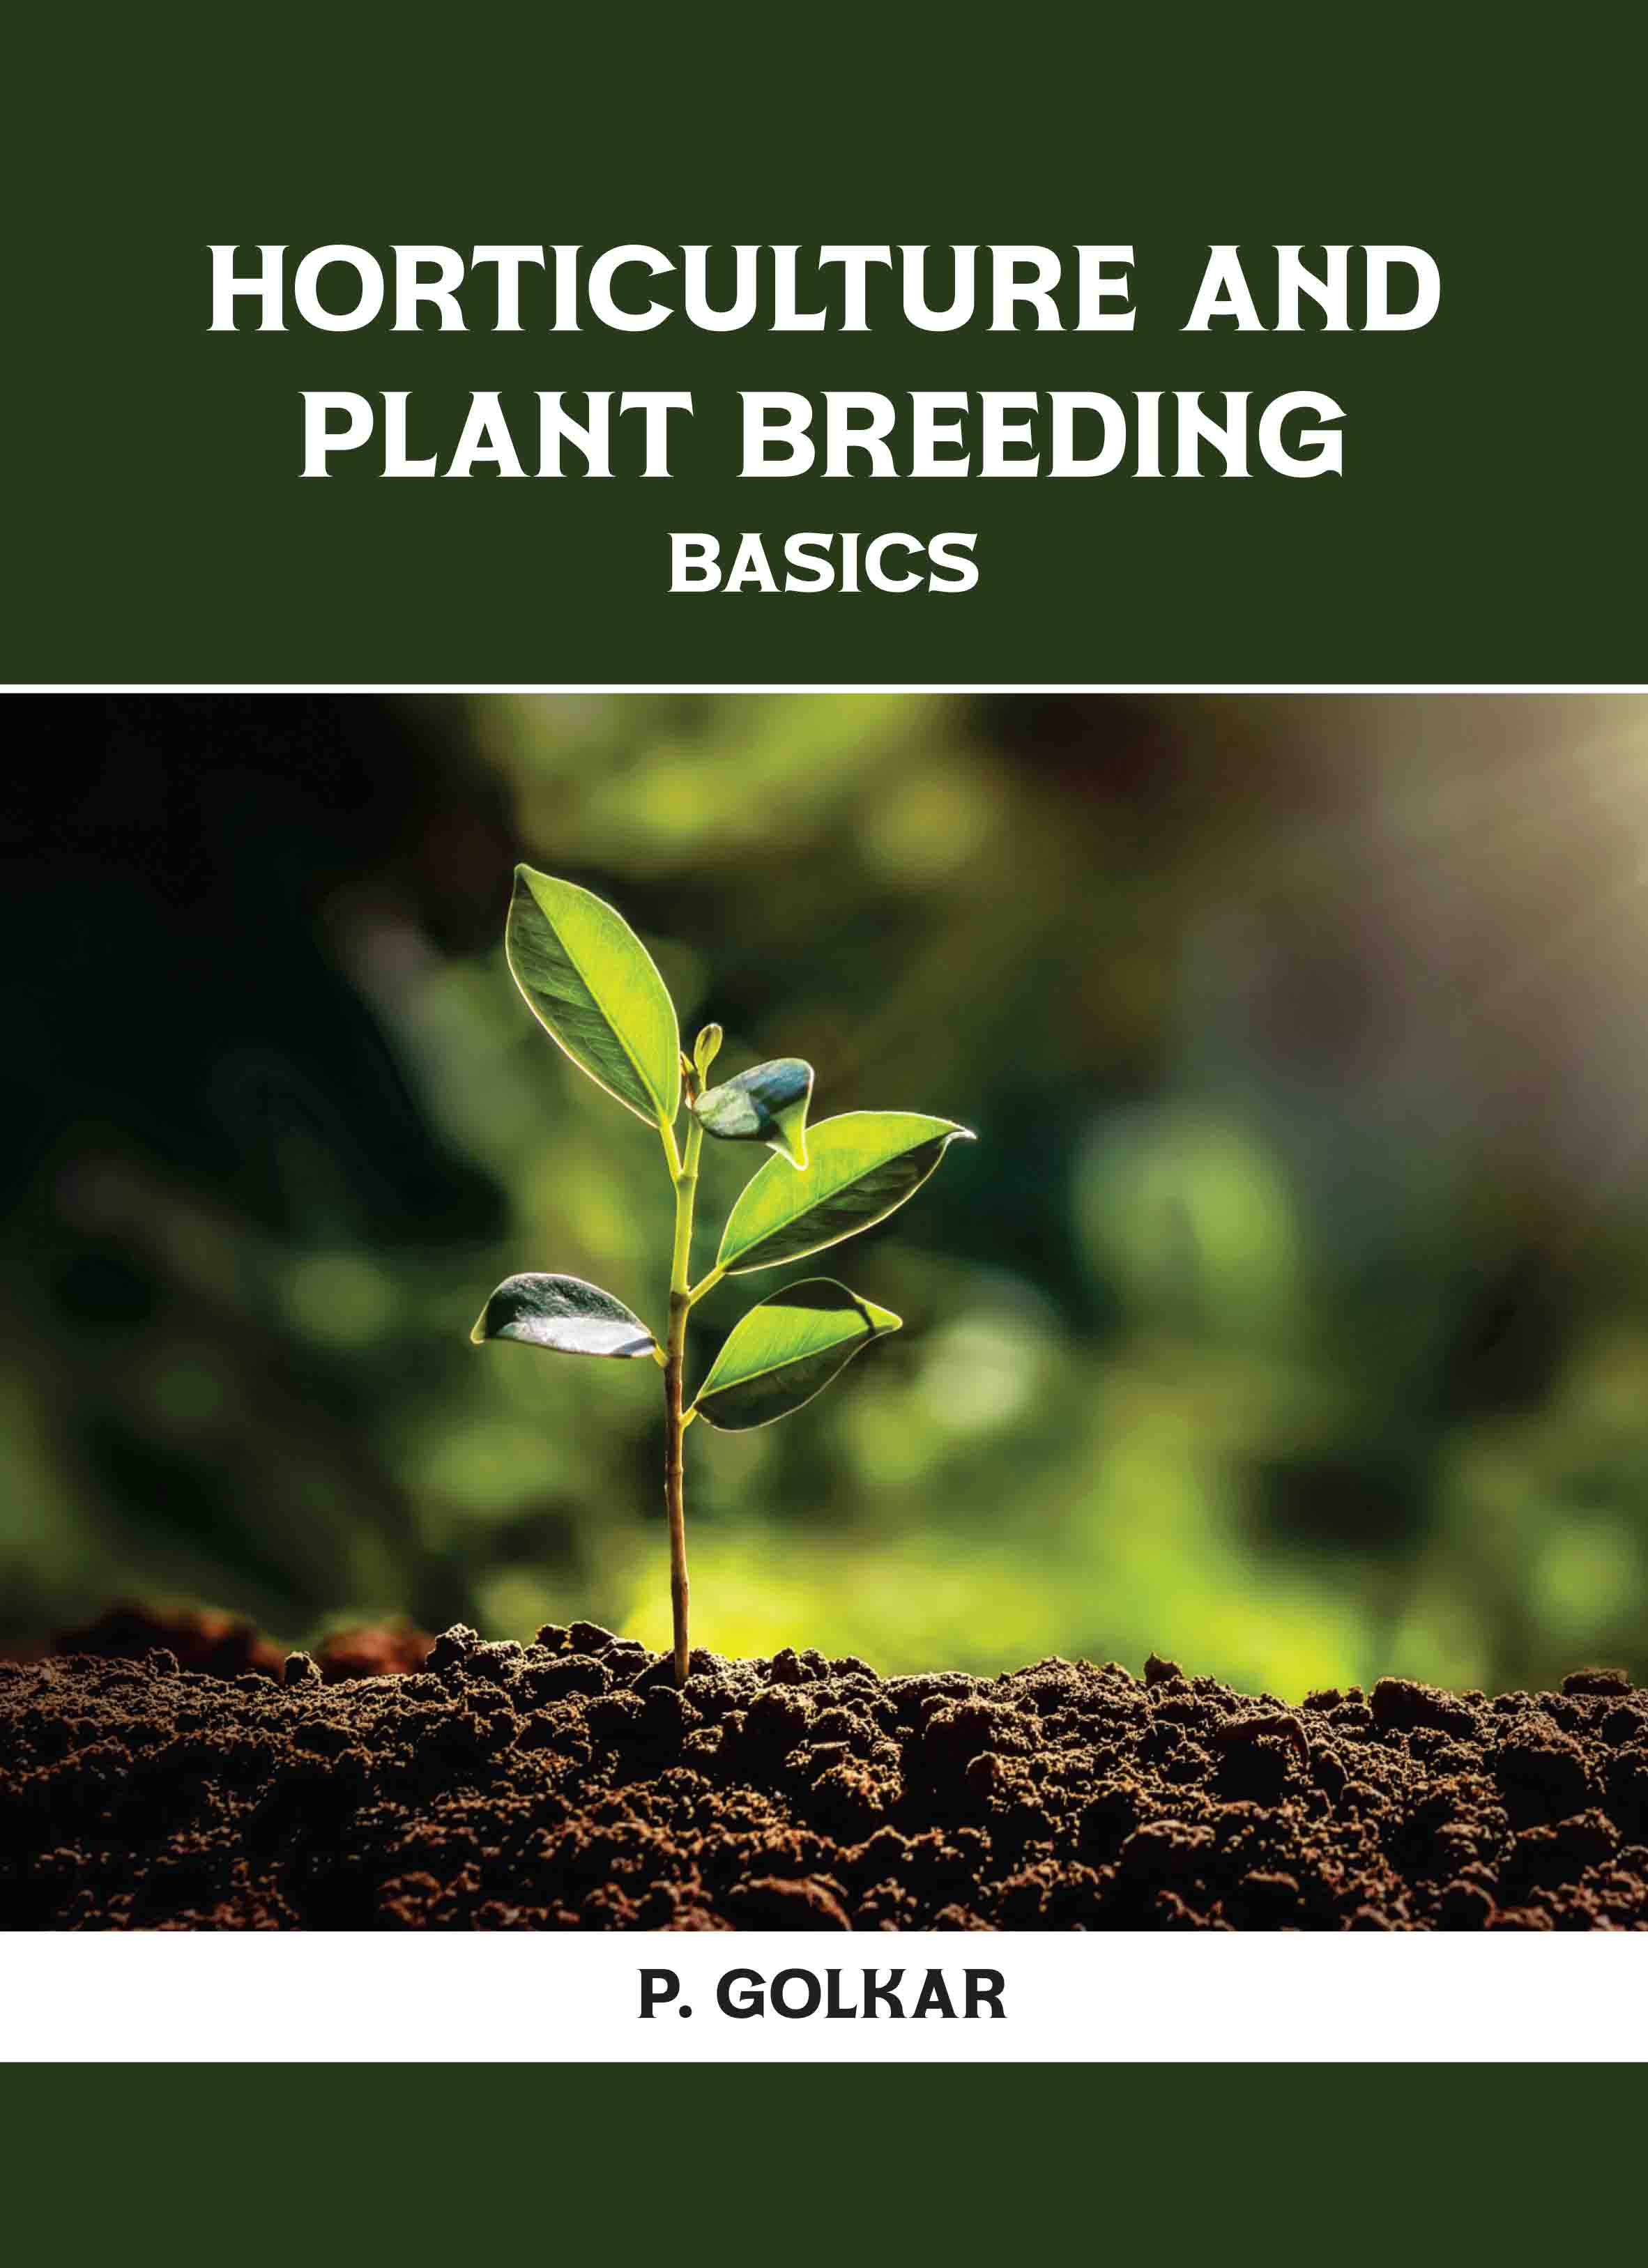 Horticulture and Plant Breeding: Basics